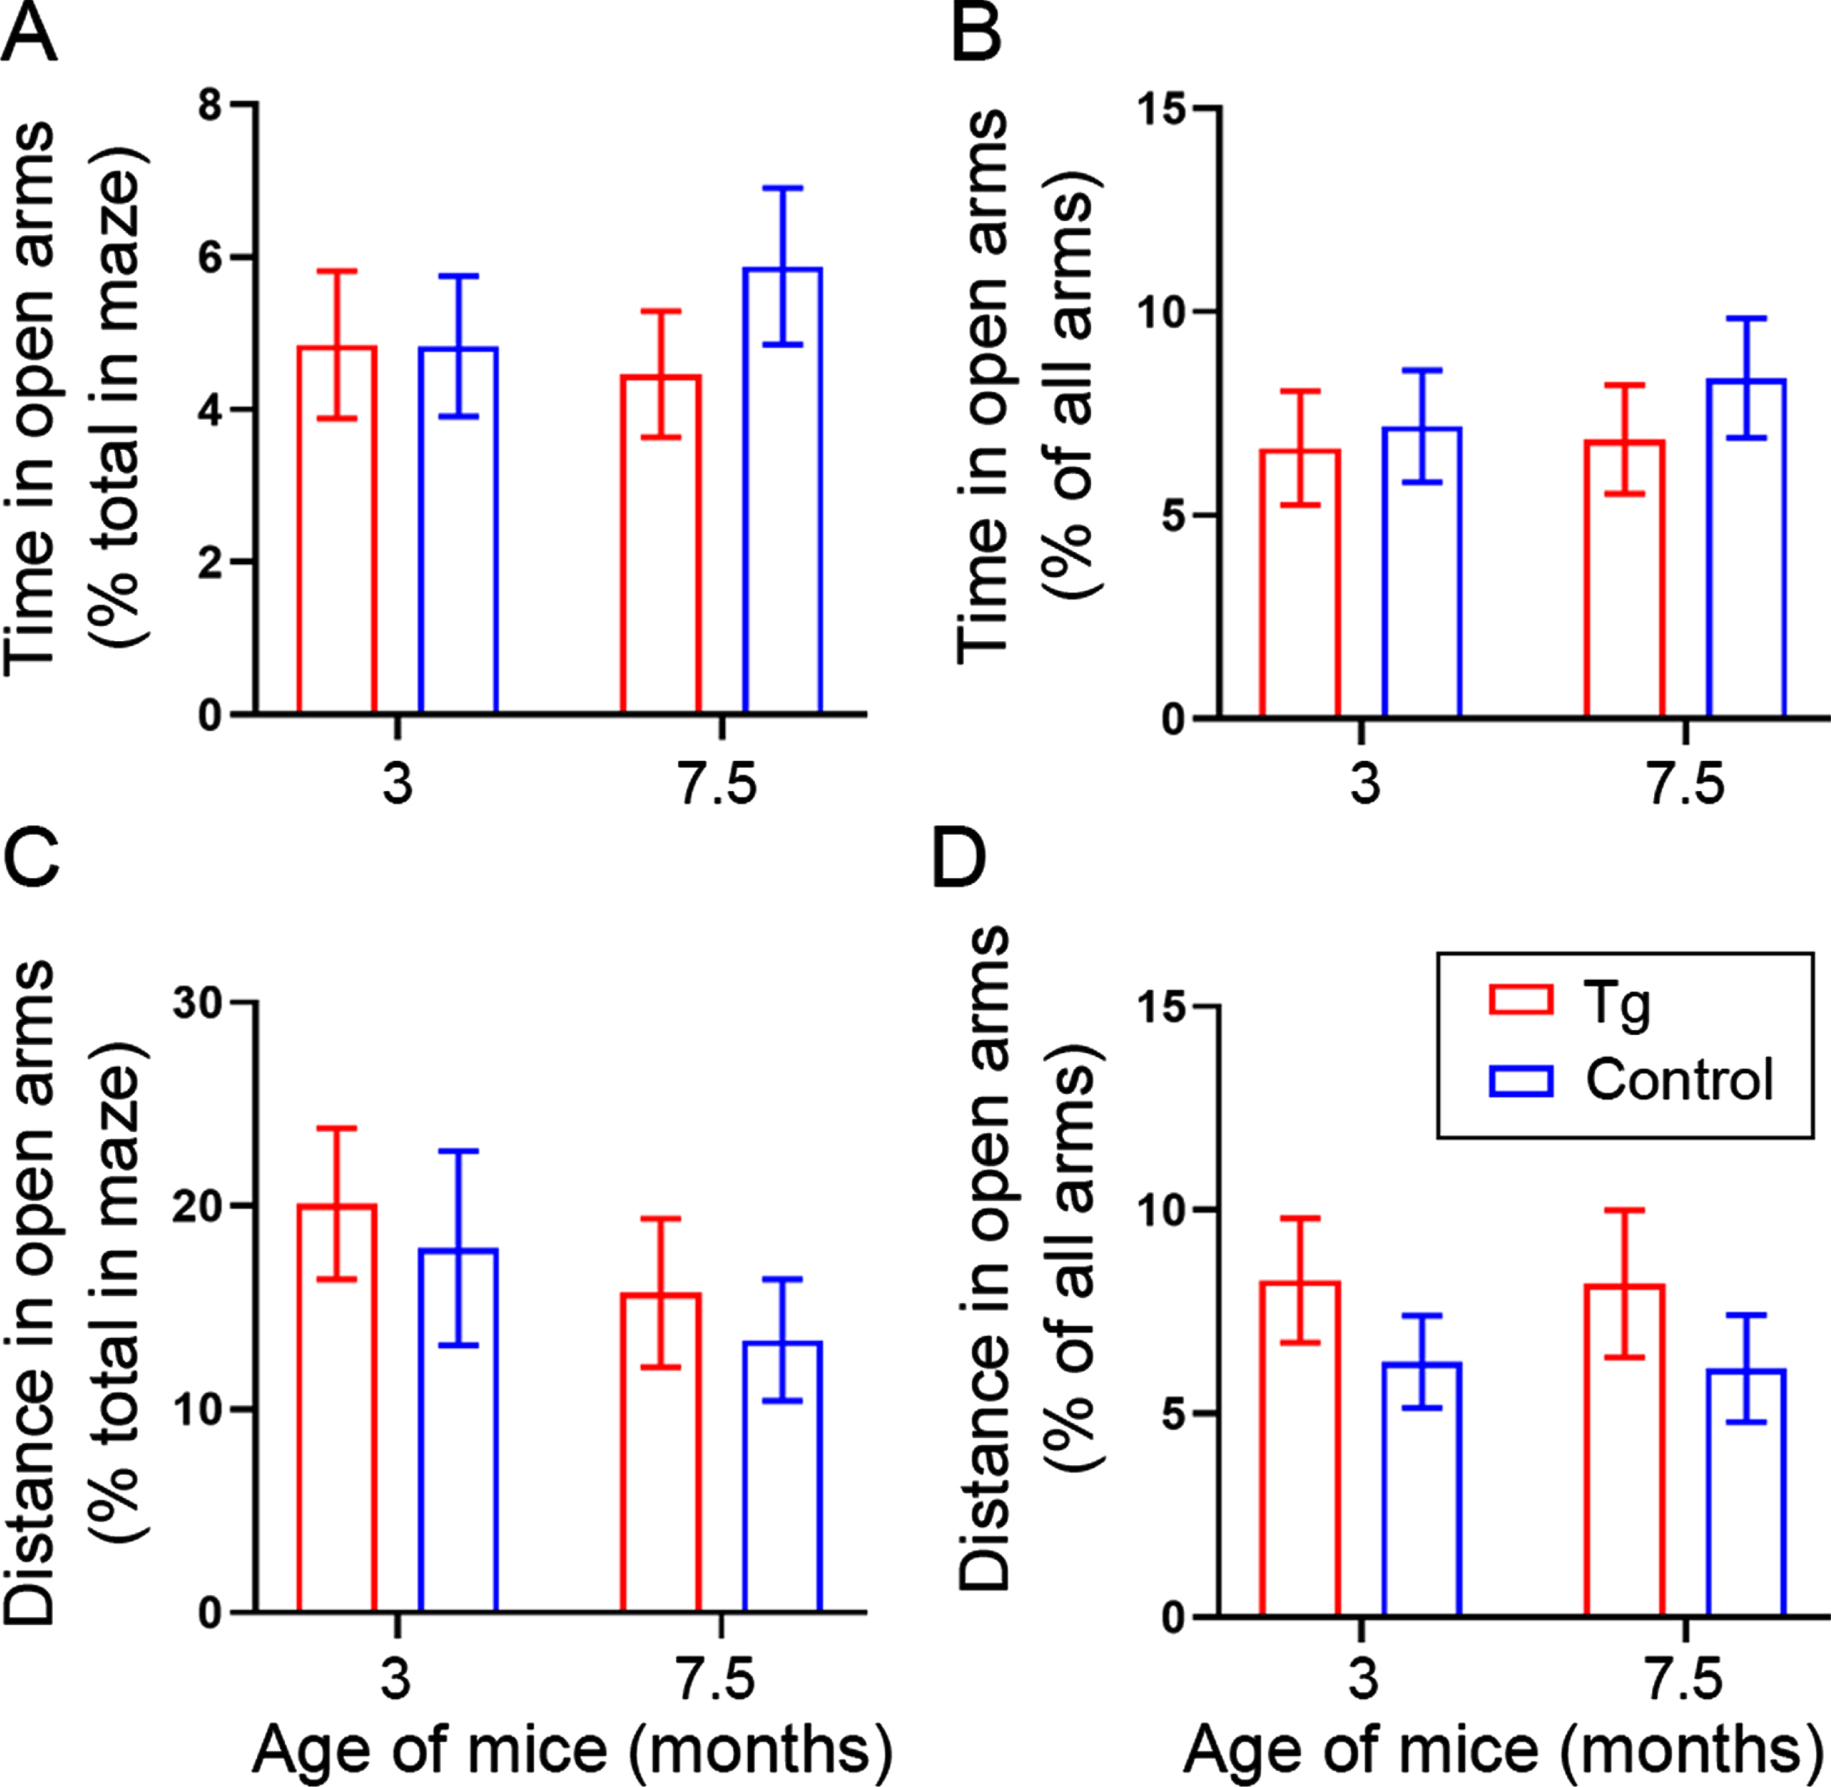 Completely tamed 3×Tg-AD and control mice exhibit comparable anxiety-like behavior in elevated plus maze at the age of 3 and 7.5 months. The percentages were calculated by dividing the time and distance in open arms with total time and total distance in the maze including the center area (A, C) or alternatively with the time and the distance in all four arms (B, D), respectively. Data are expressed as mean±SEM (n = 12−23 mice/condition) and analyzed with two-way ANOVA. No statistically significant effect was detected in the main factors, genotype, or age, nor in the interaction.